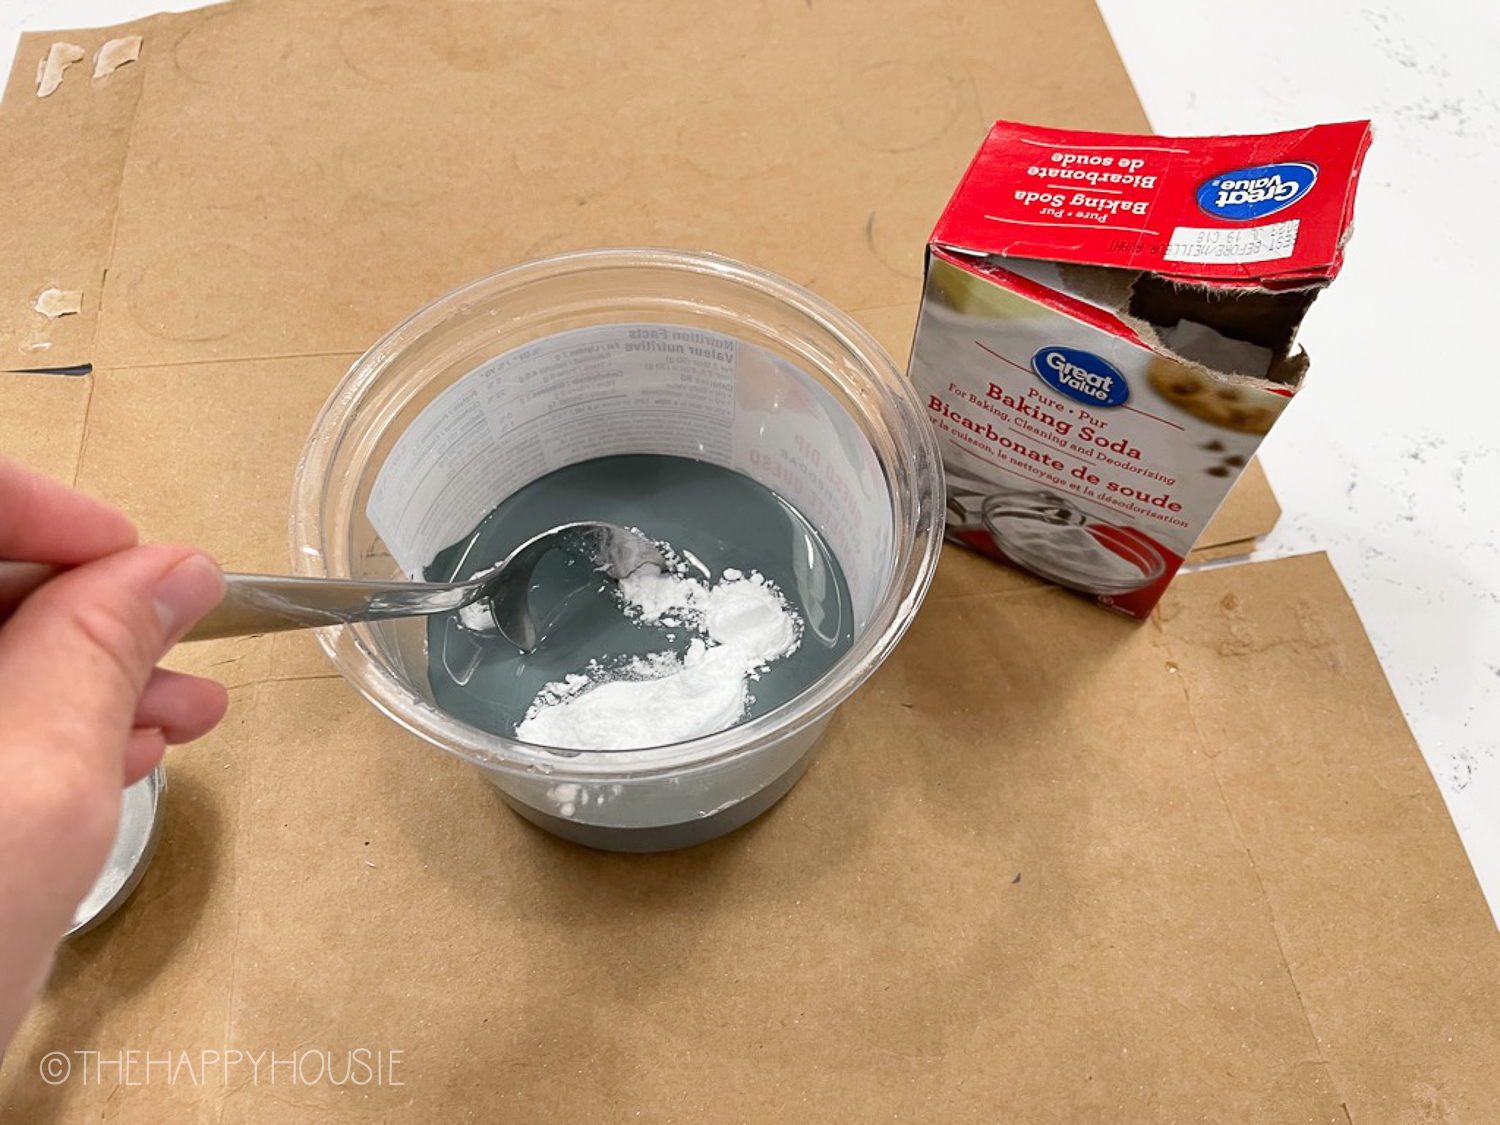 Mixing the paint with the baking soda.